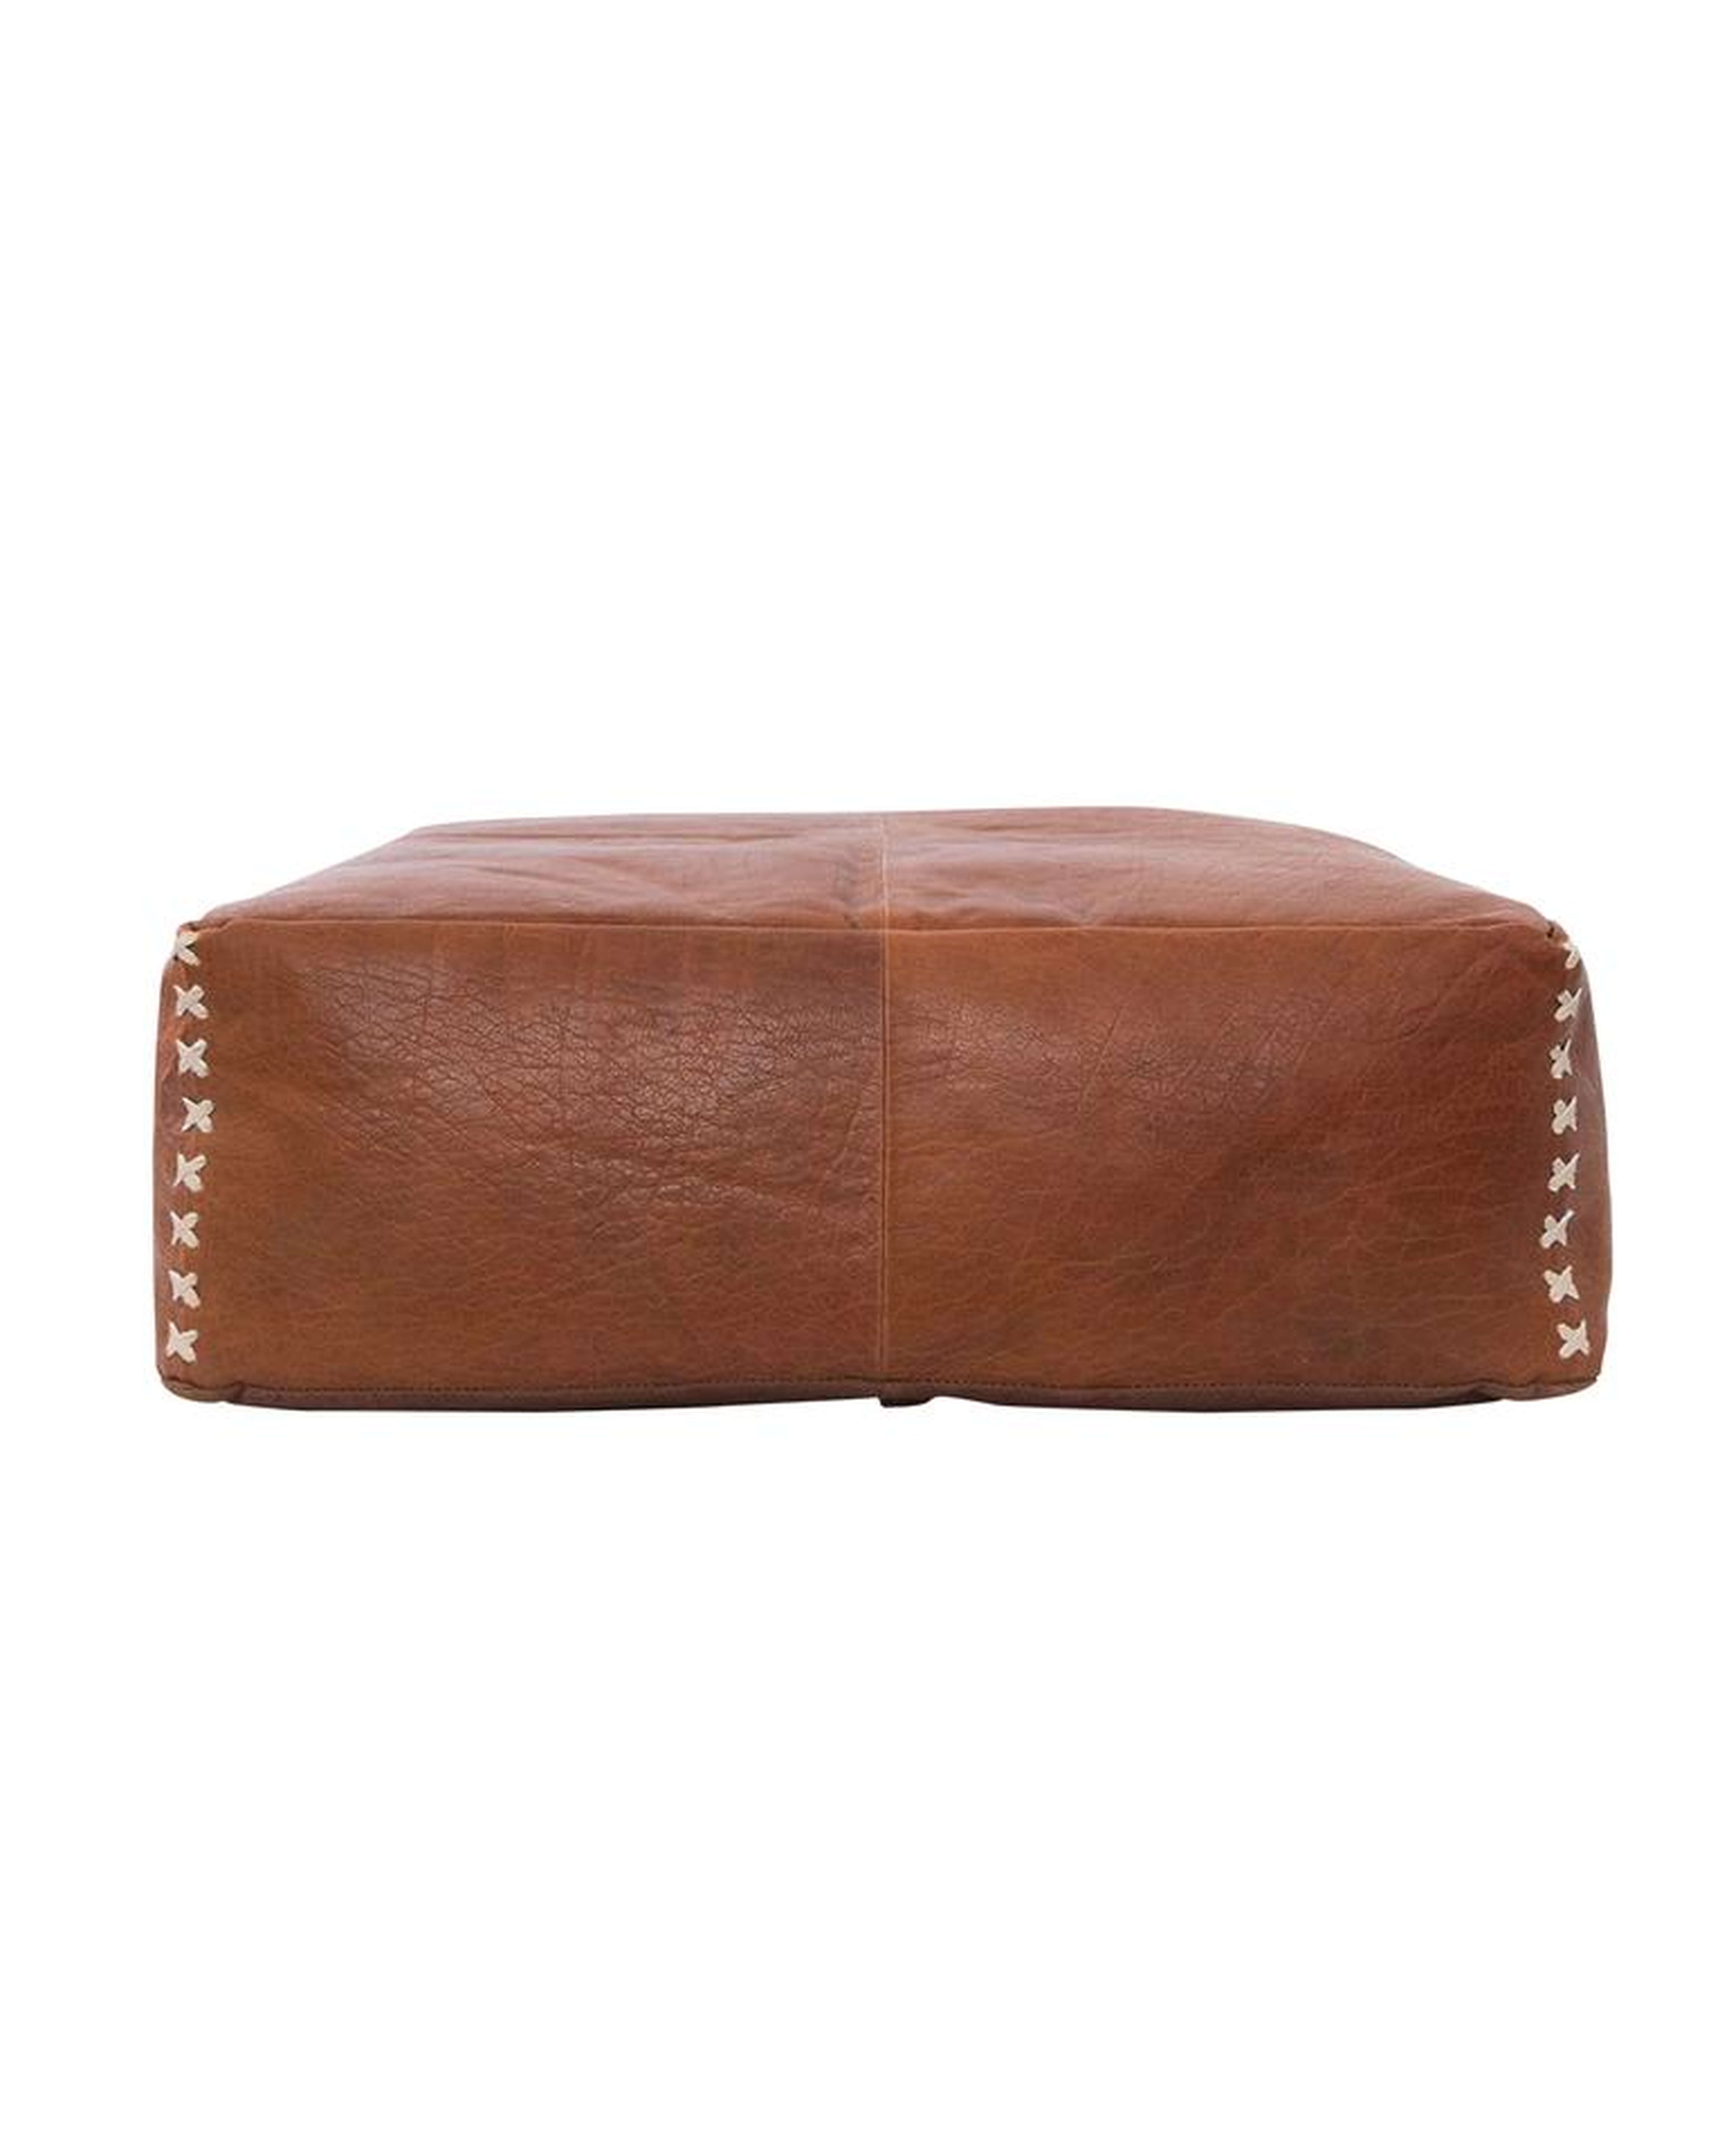 JACKIE LEATHER POUF - McGee & Co.